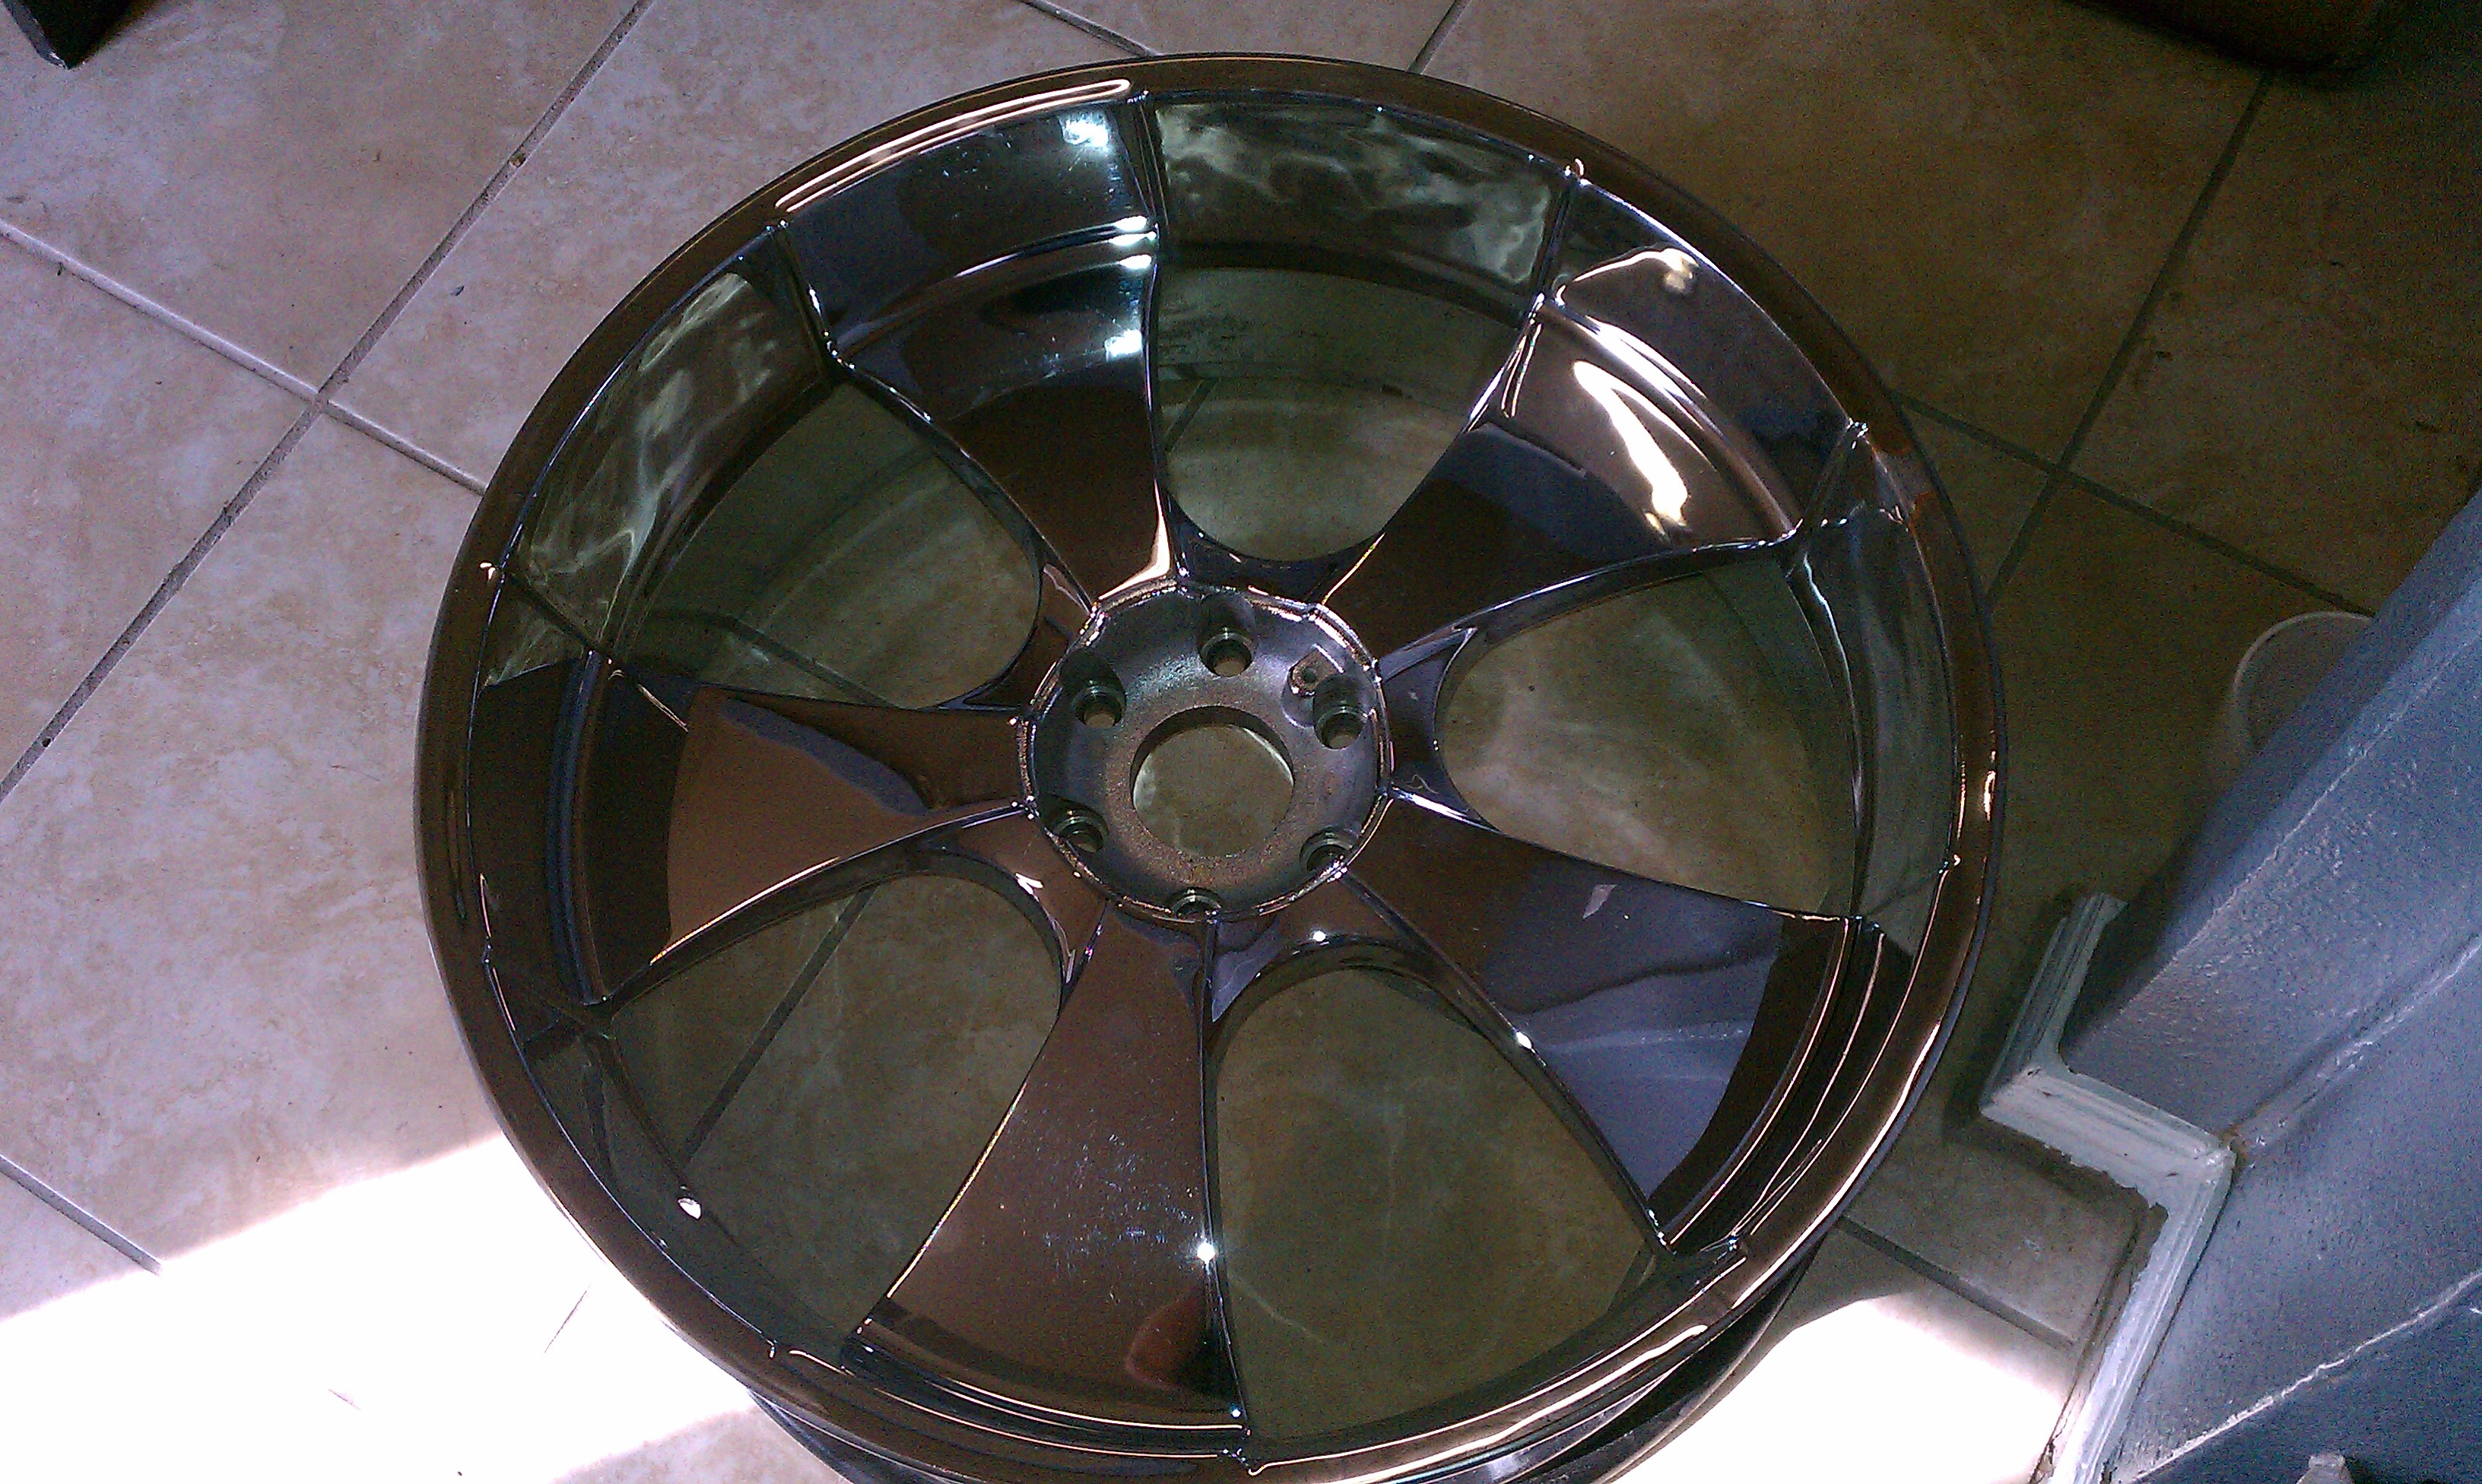 26 inch rim after the makeover scroll below for more details